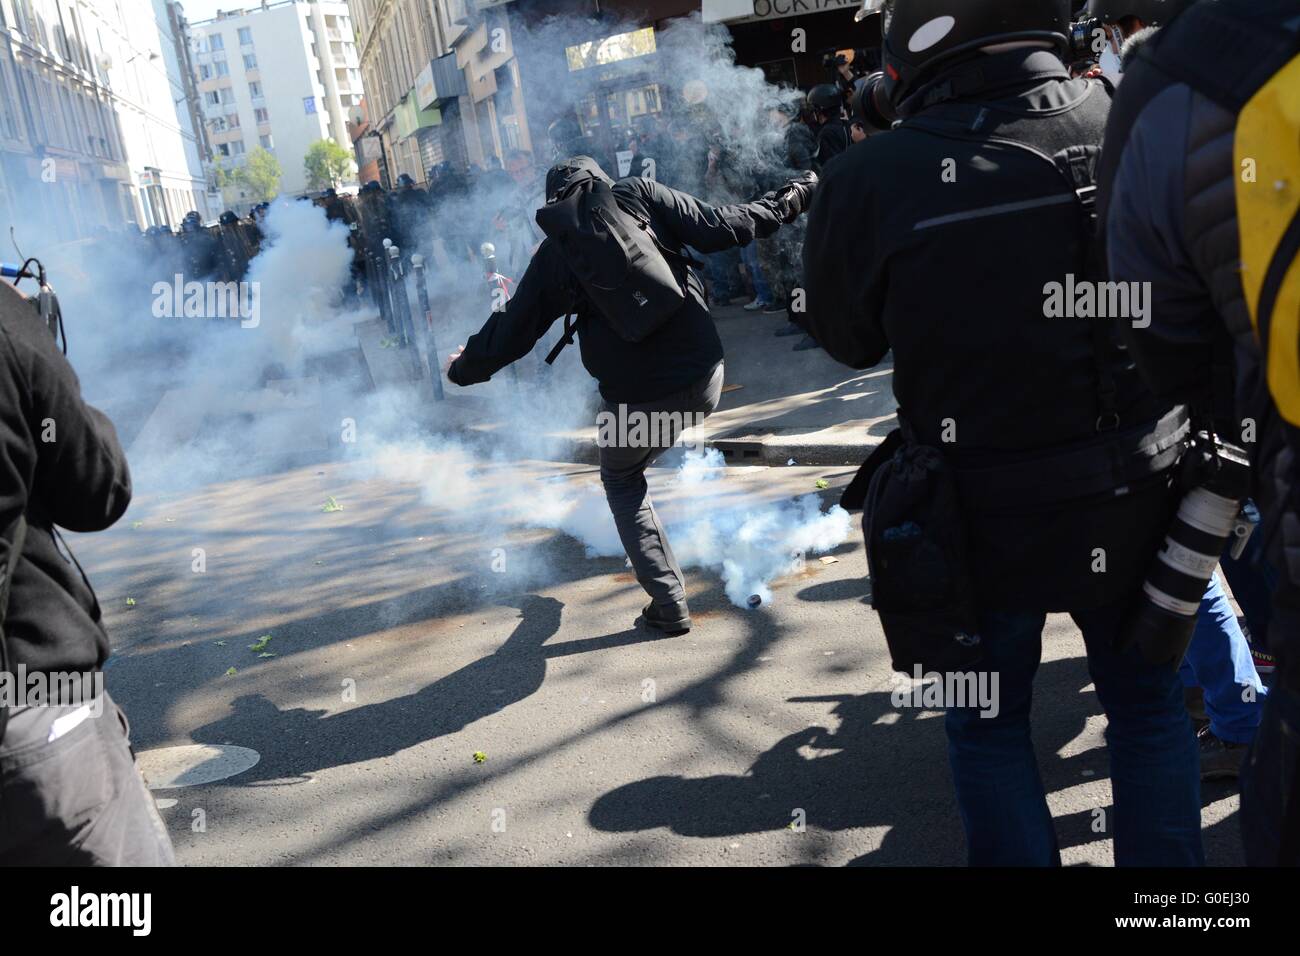 Paris, France. 1 May 2016. Protester kicks a teargas cannister away as labour law protest turns violent Credit: Marc Ward/Alamy Live News Stock Photo